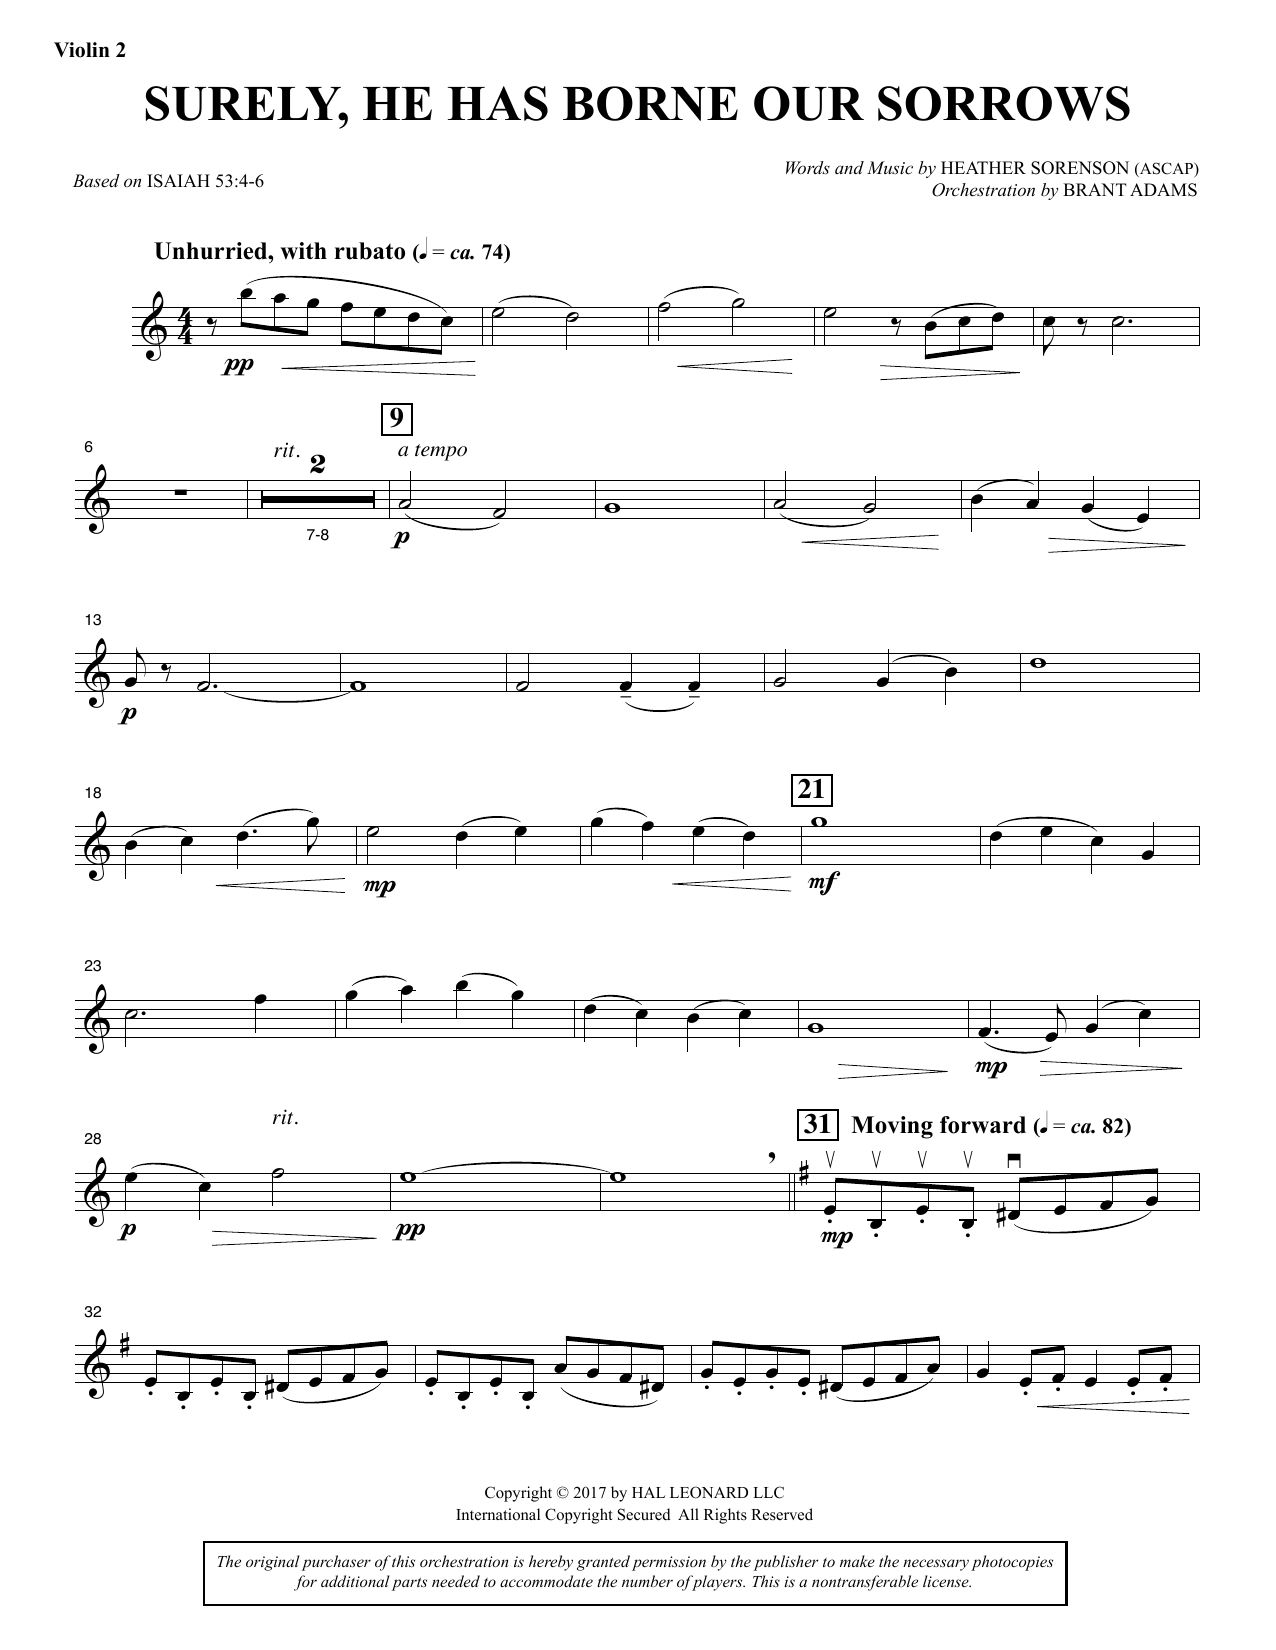 Download Heather Sorenson Surely, He Has Borne Our Sorrows - Viol Sheet Music